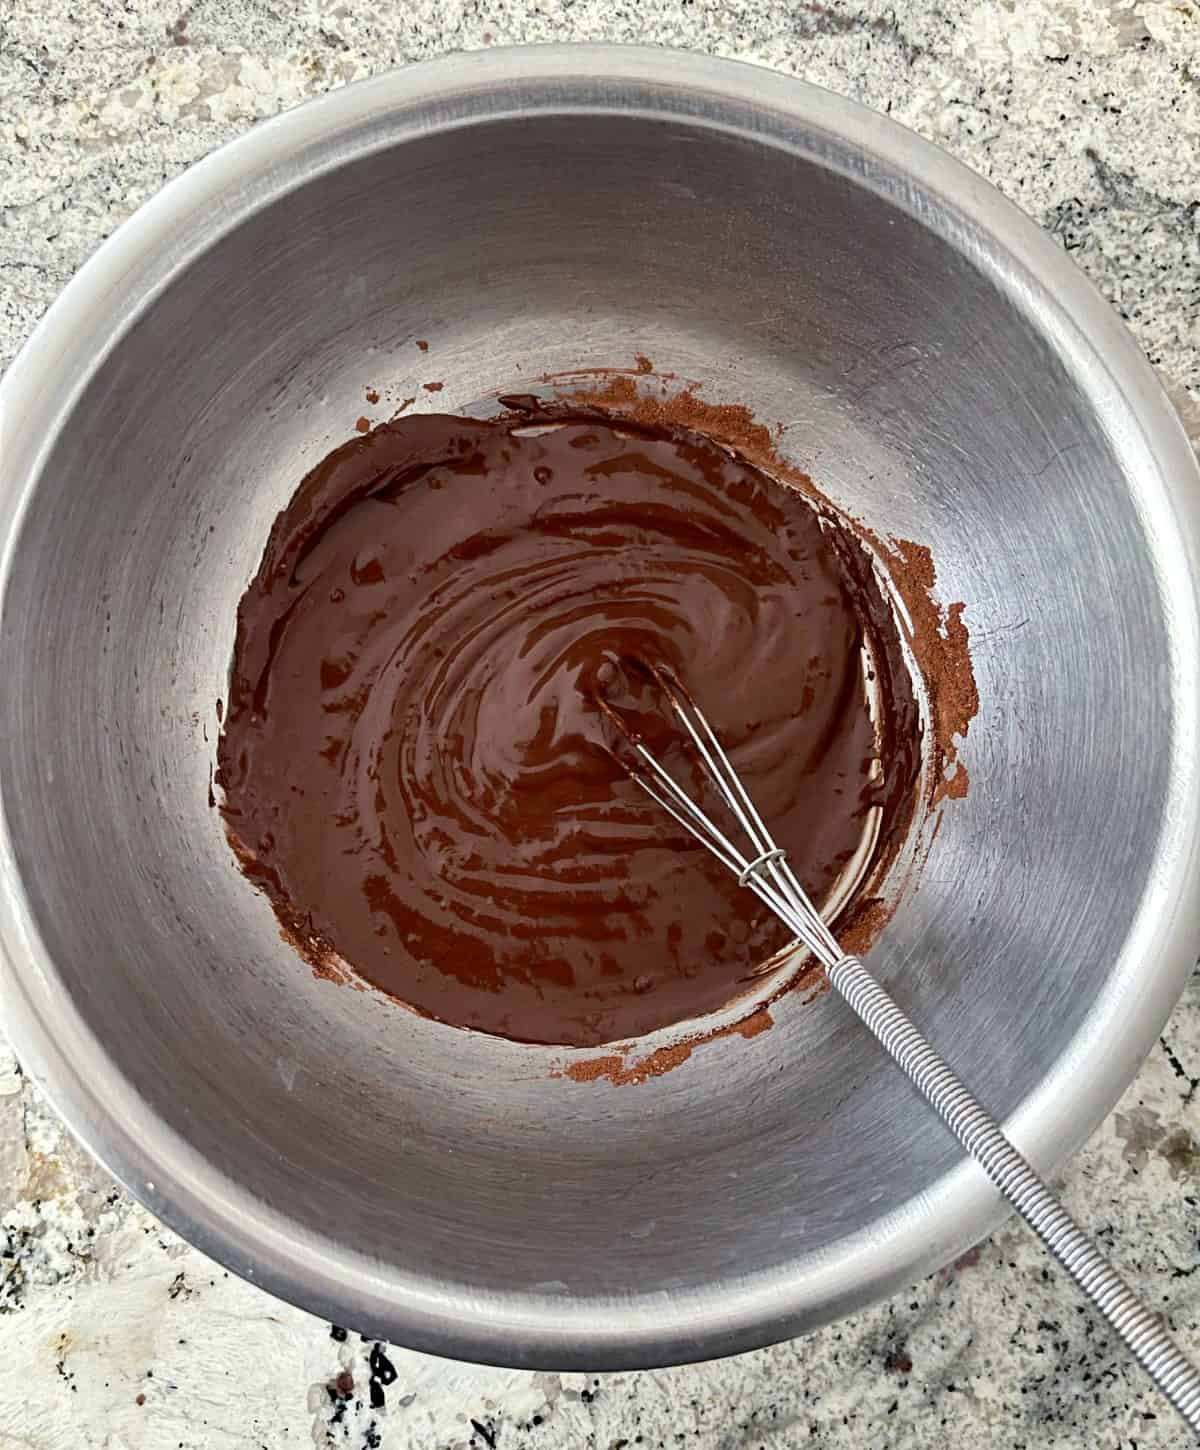 Mixing flourless chocolate mug cake batter in mixing bowl with whisk.